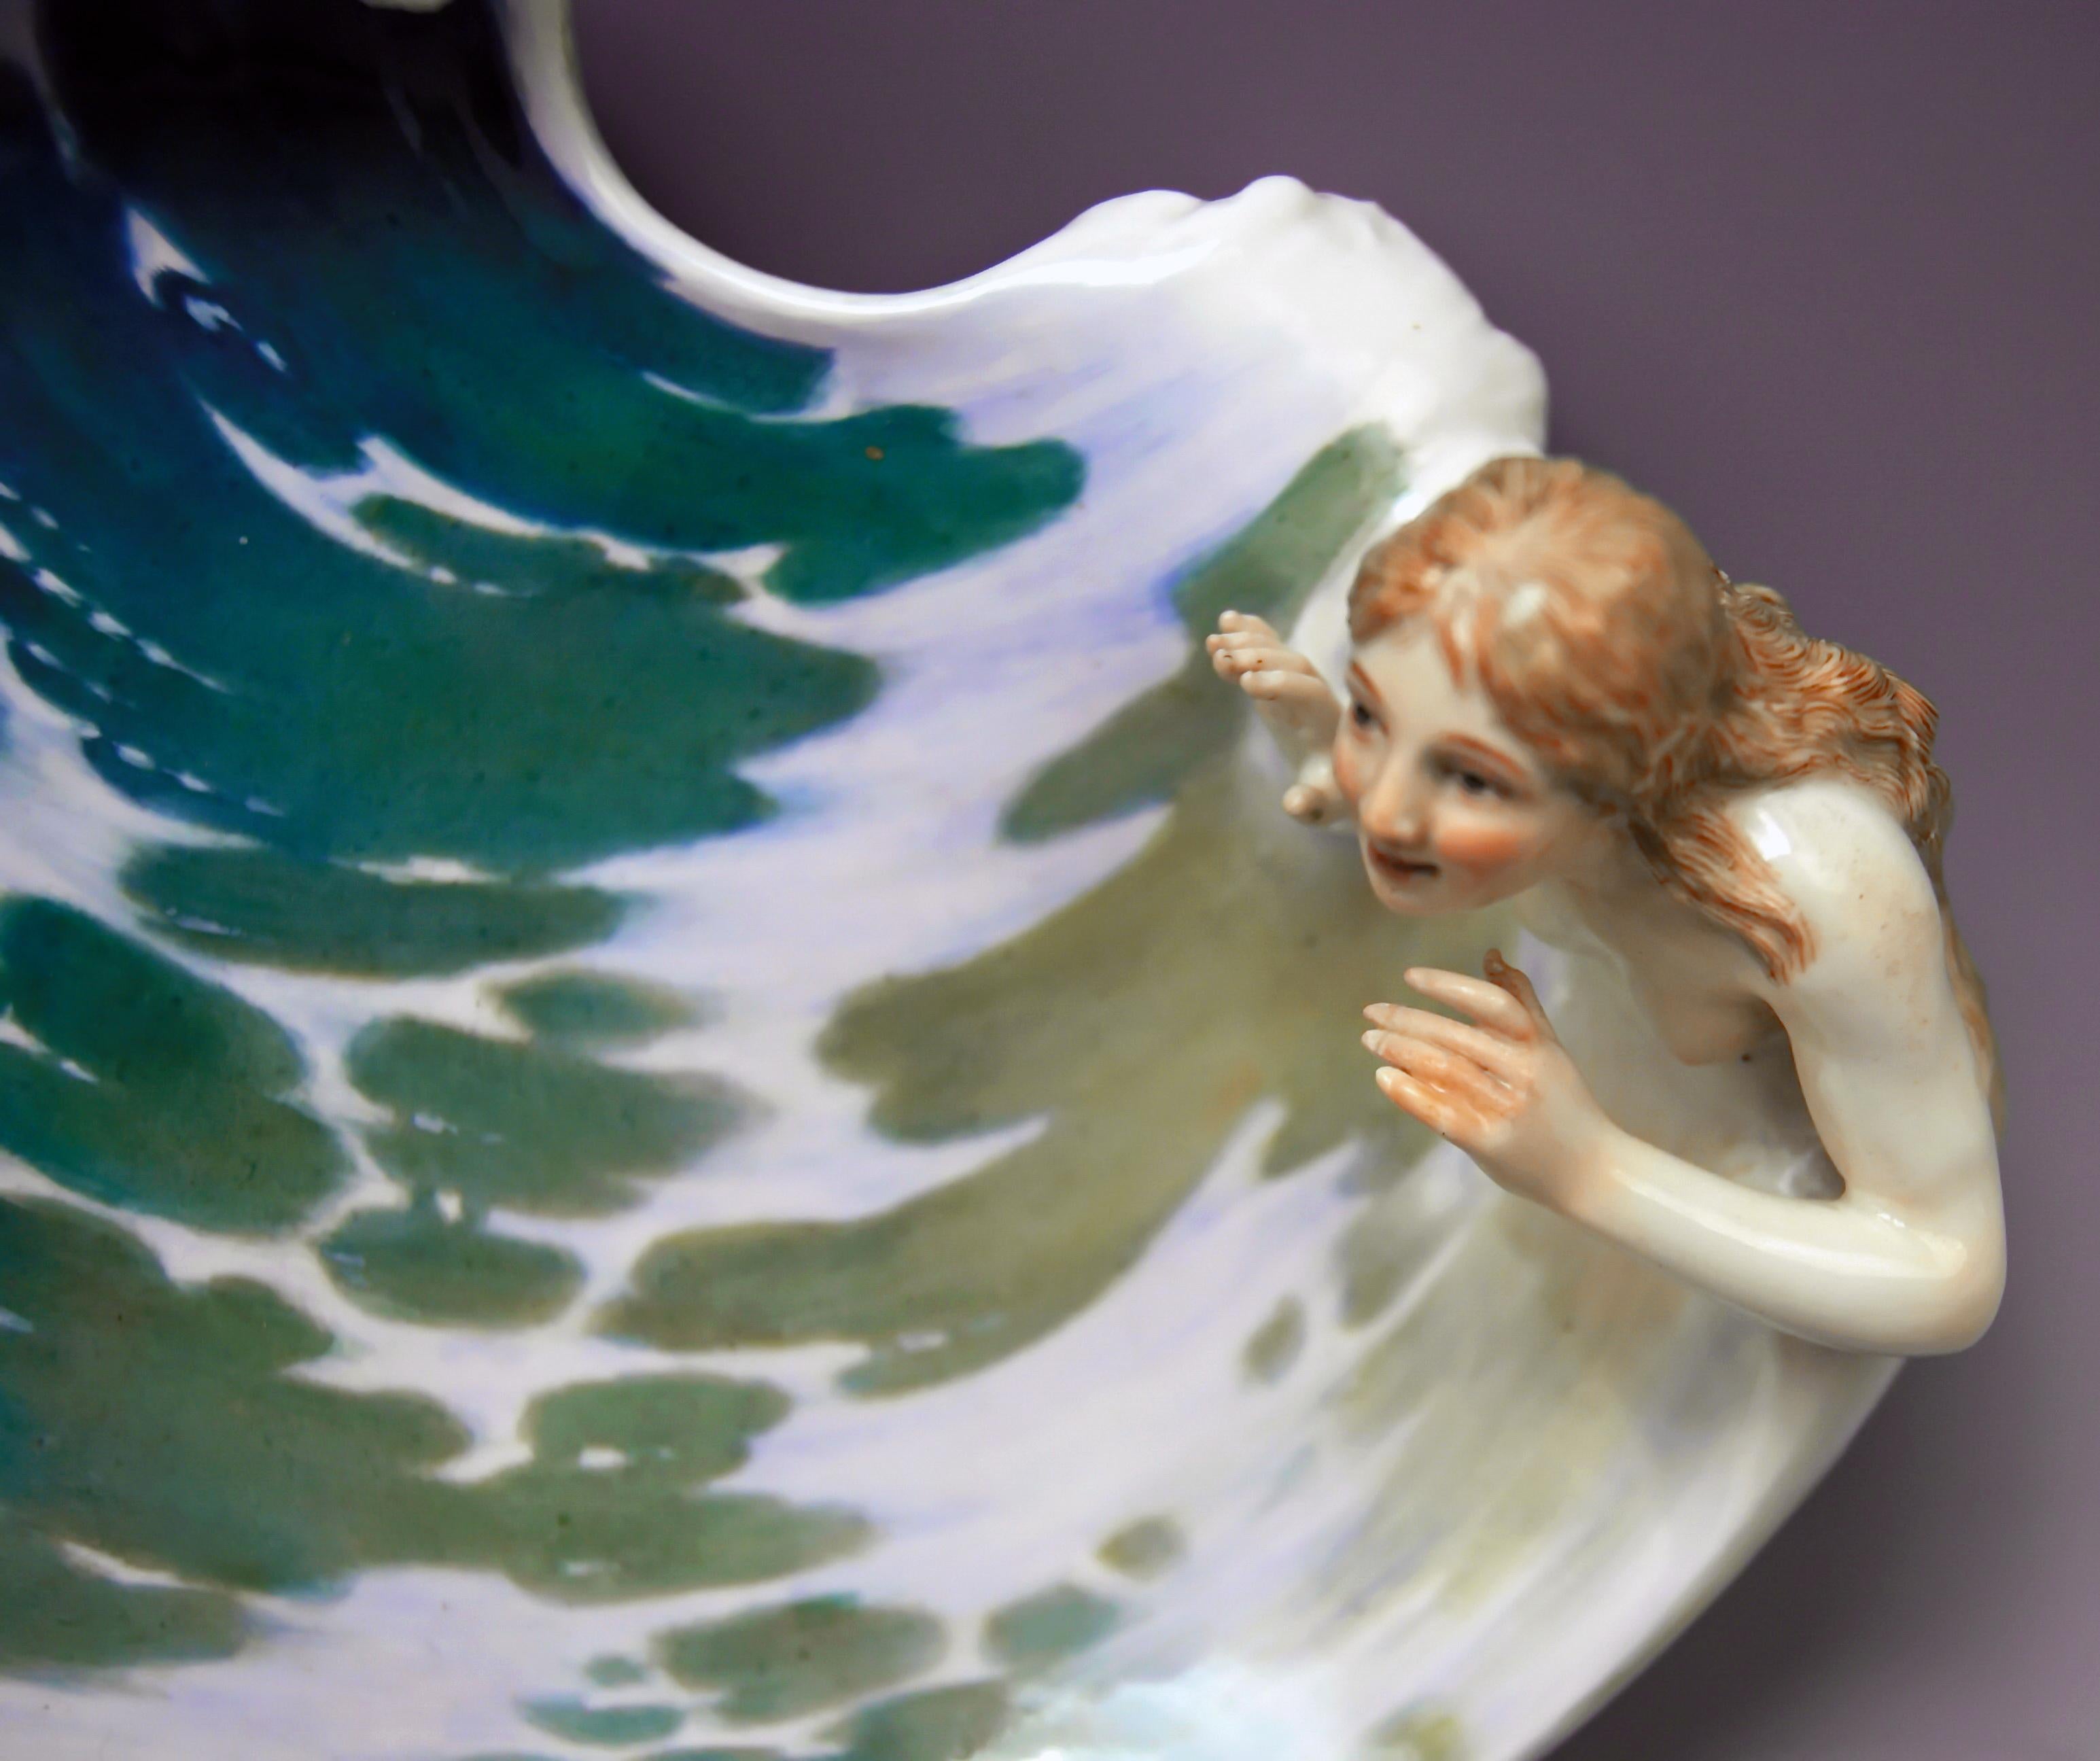 Meissen rarest Art Nouveau item: The wave

Size:
Height 3.34 inches
Depth 6.10 inches
Width 8.26 inches

Manufactory: Meissen
Hallmarked: Blue Meissen sword mark (glazed bottom)
model number Q 169 / former's number 182/126
First